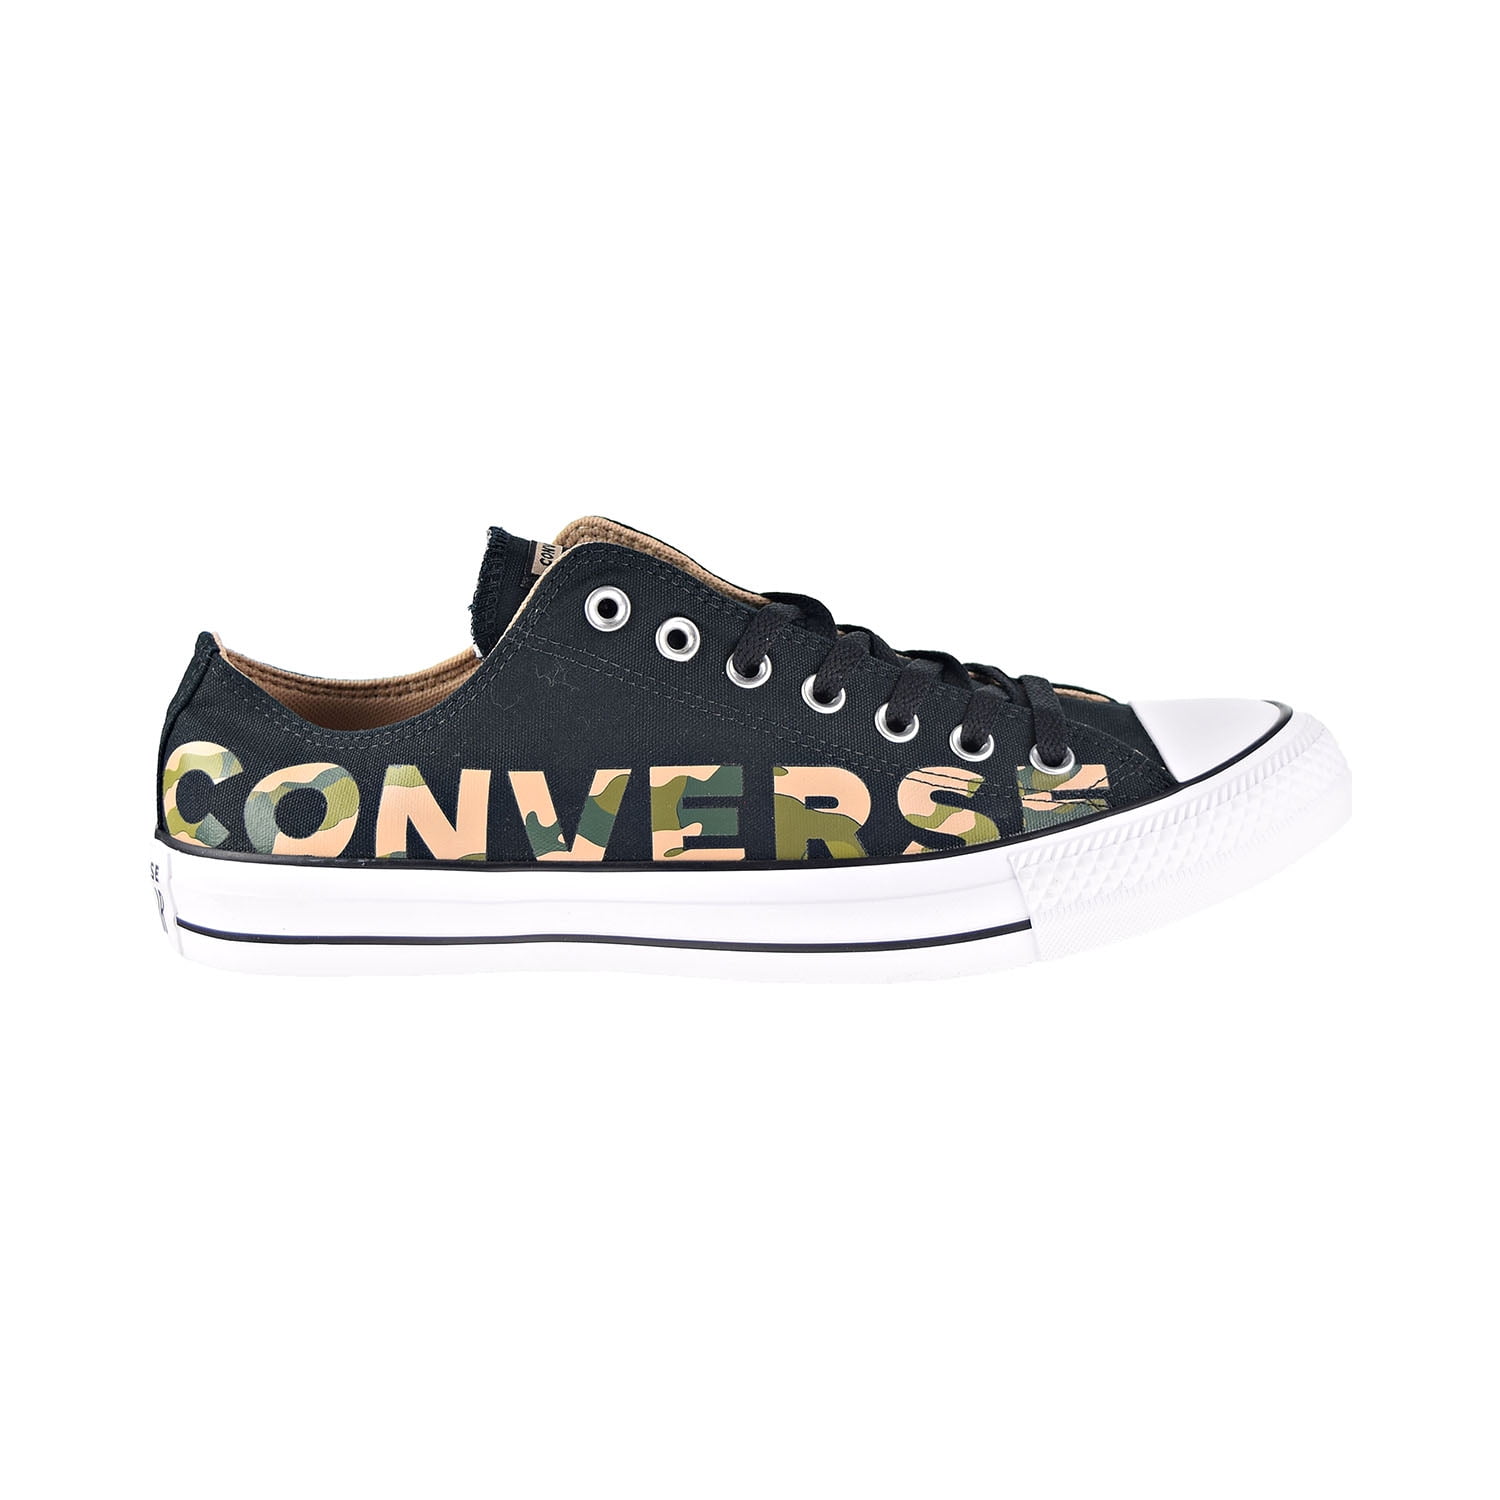 converse all star camouflage